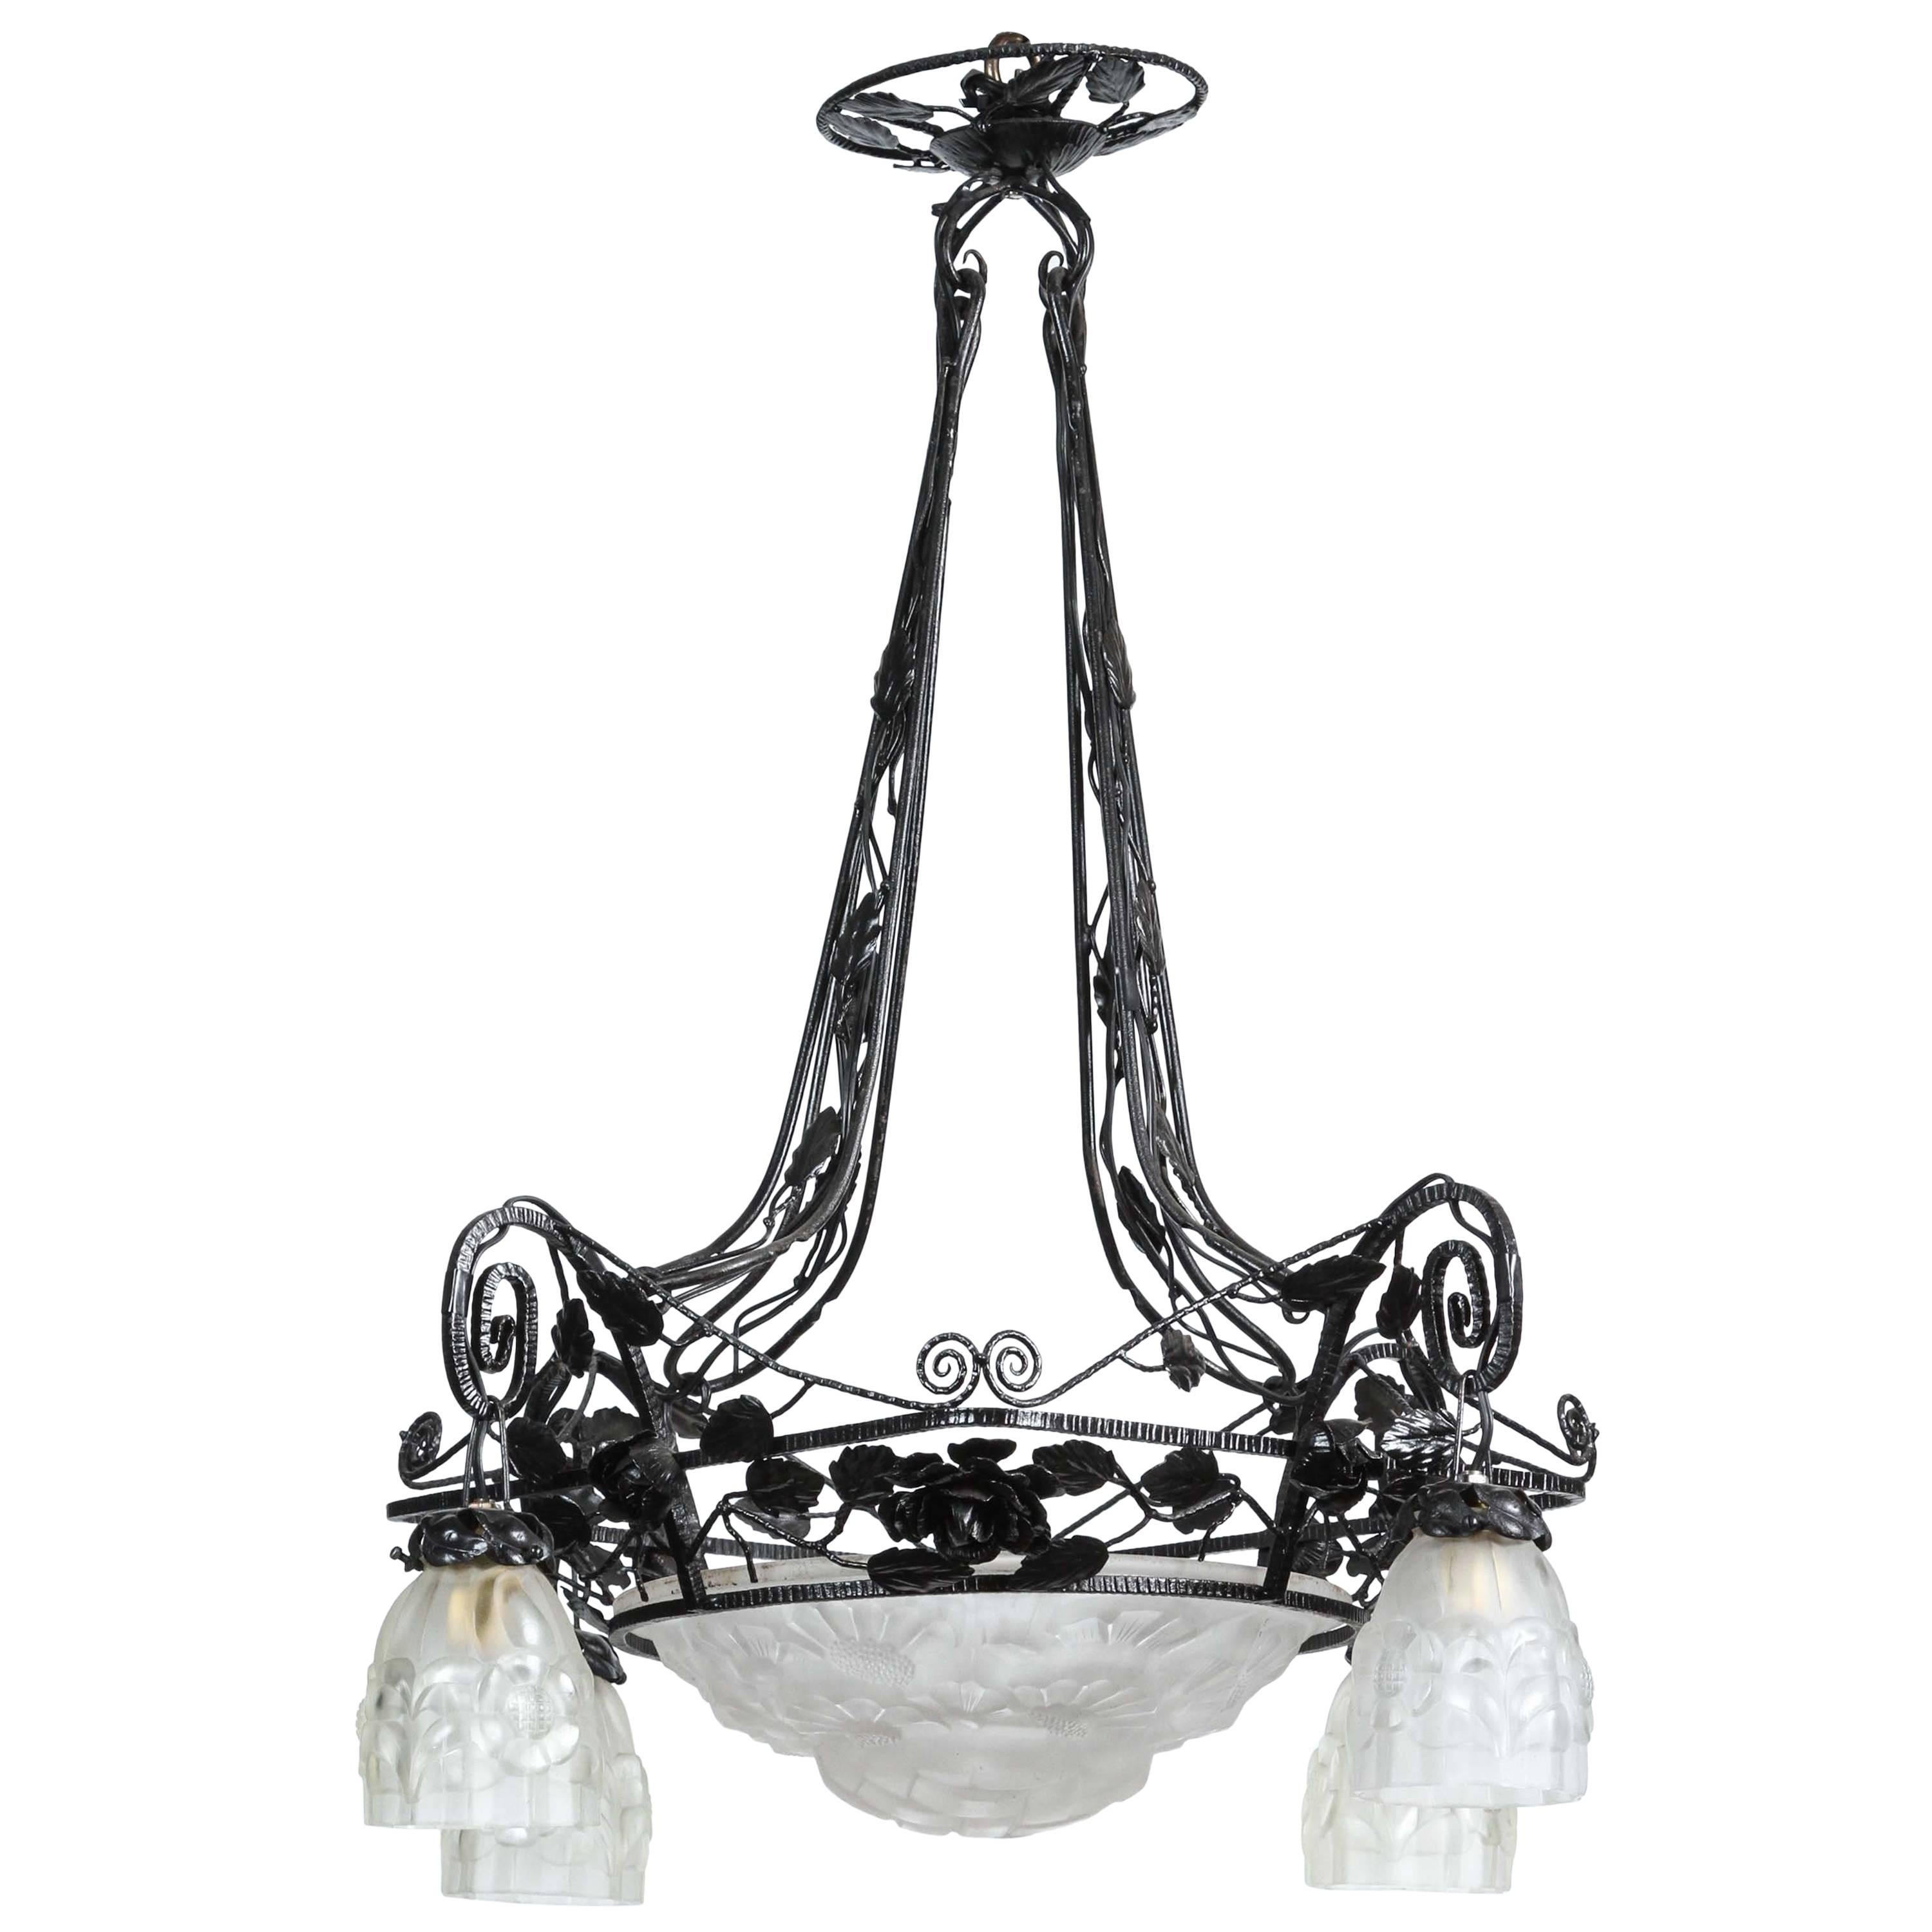 Wrought Iron Frosted Glass 4 Light Floral Chandelier For Sale